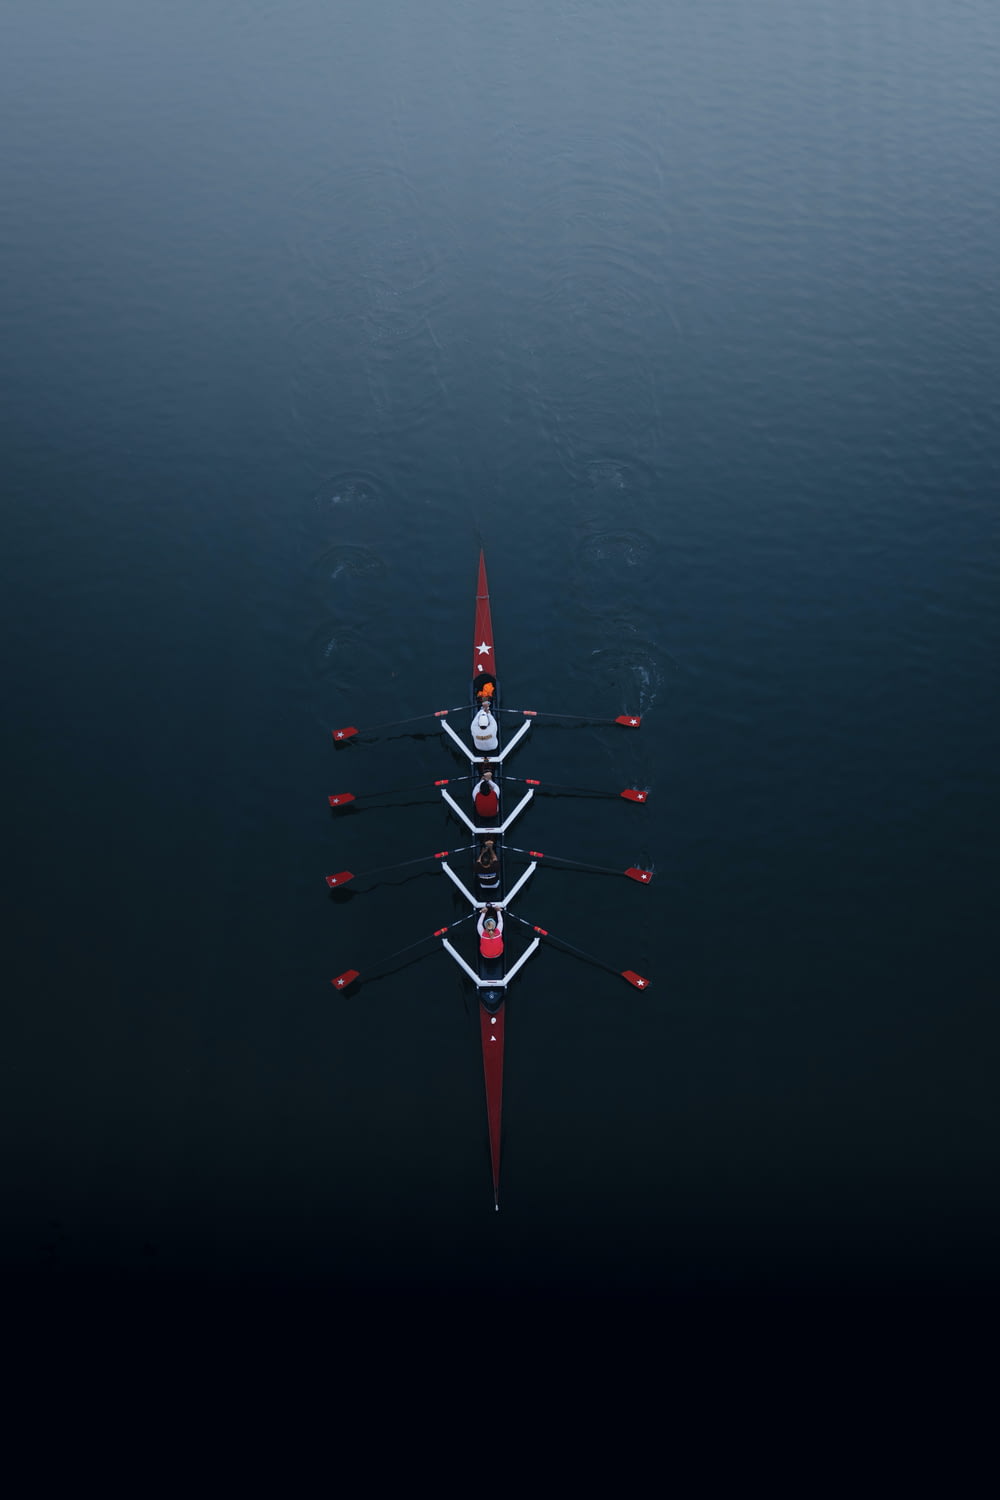 a row of boats floating on top of a body of water